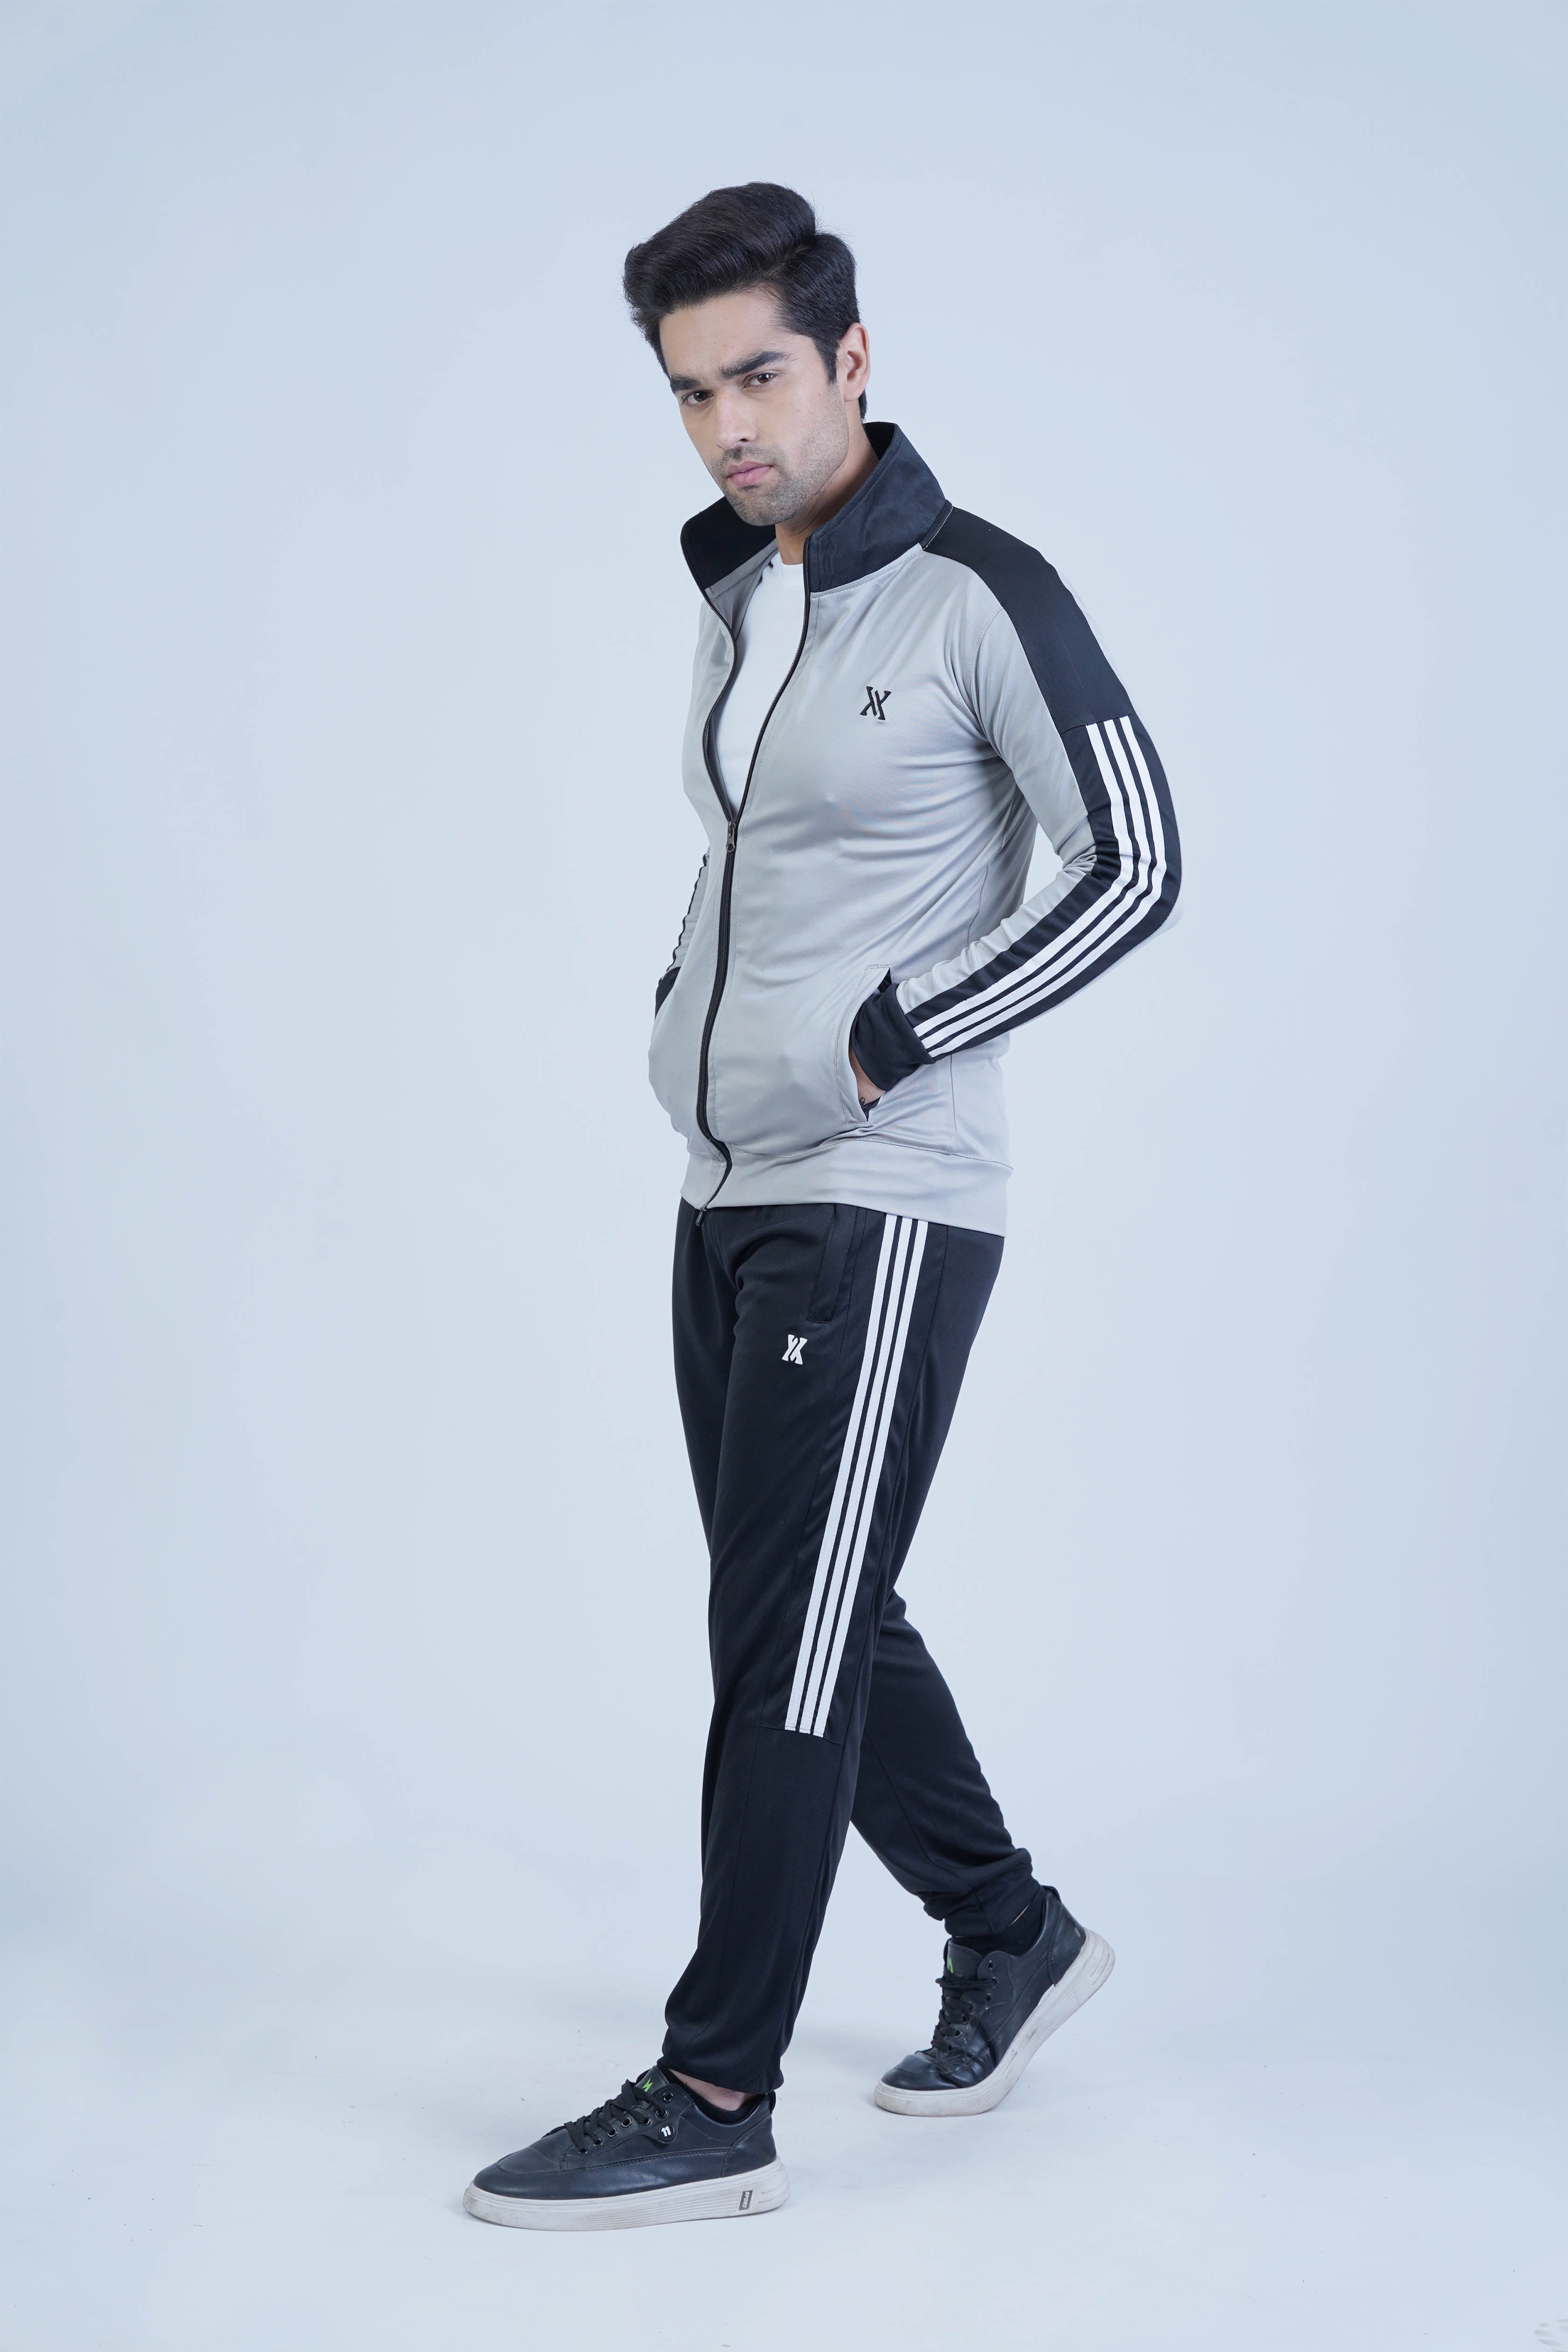 The Xea Men's Clothing Retro-Inspired Tracksuit